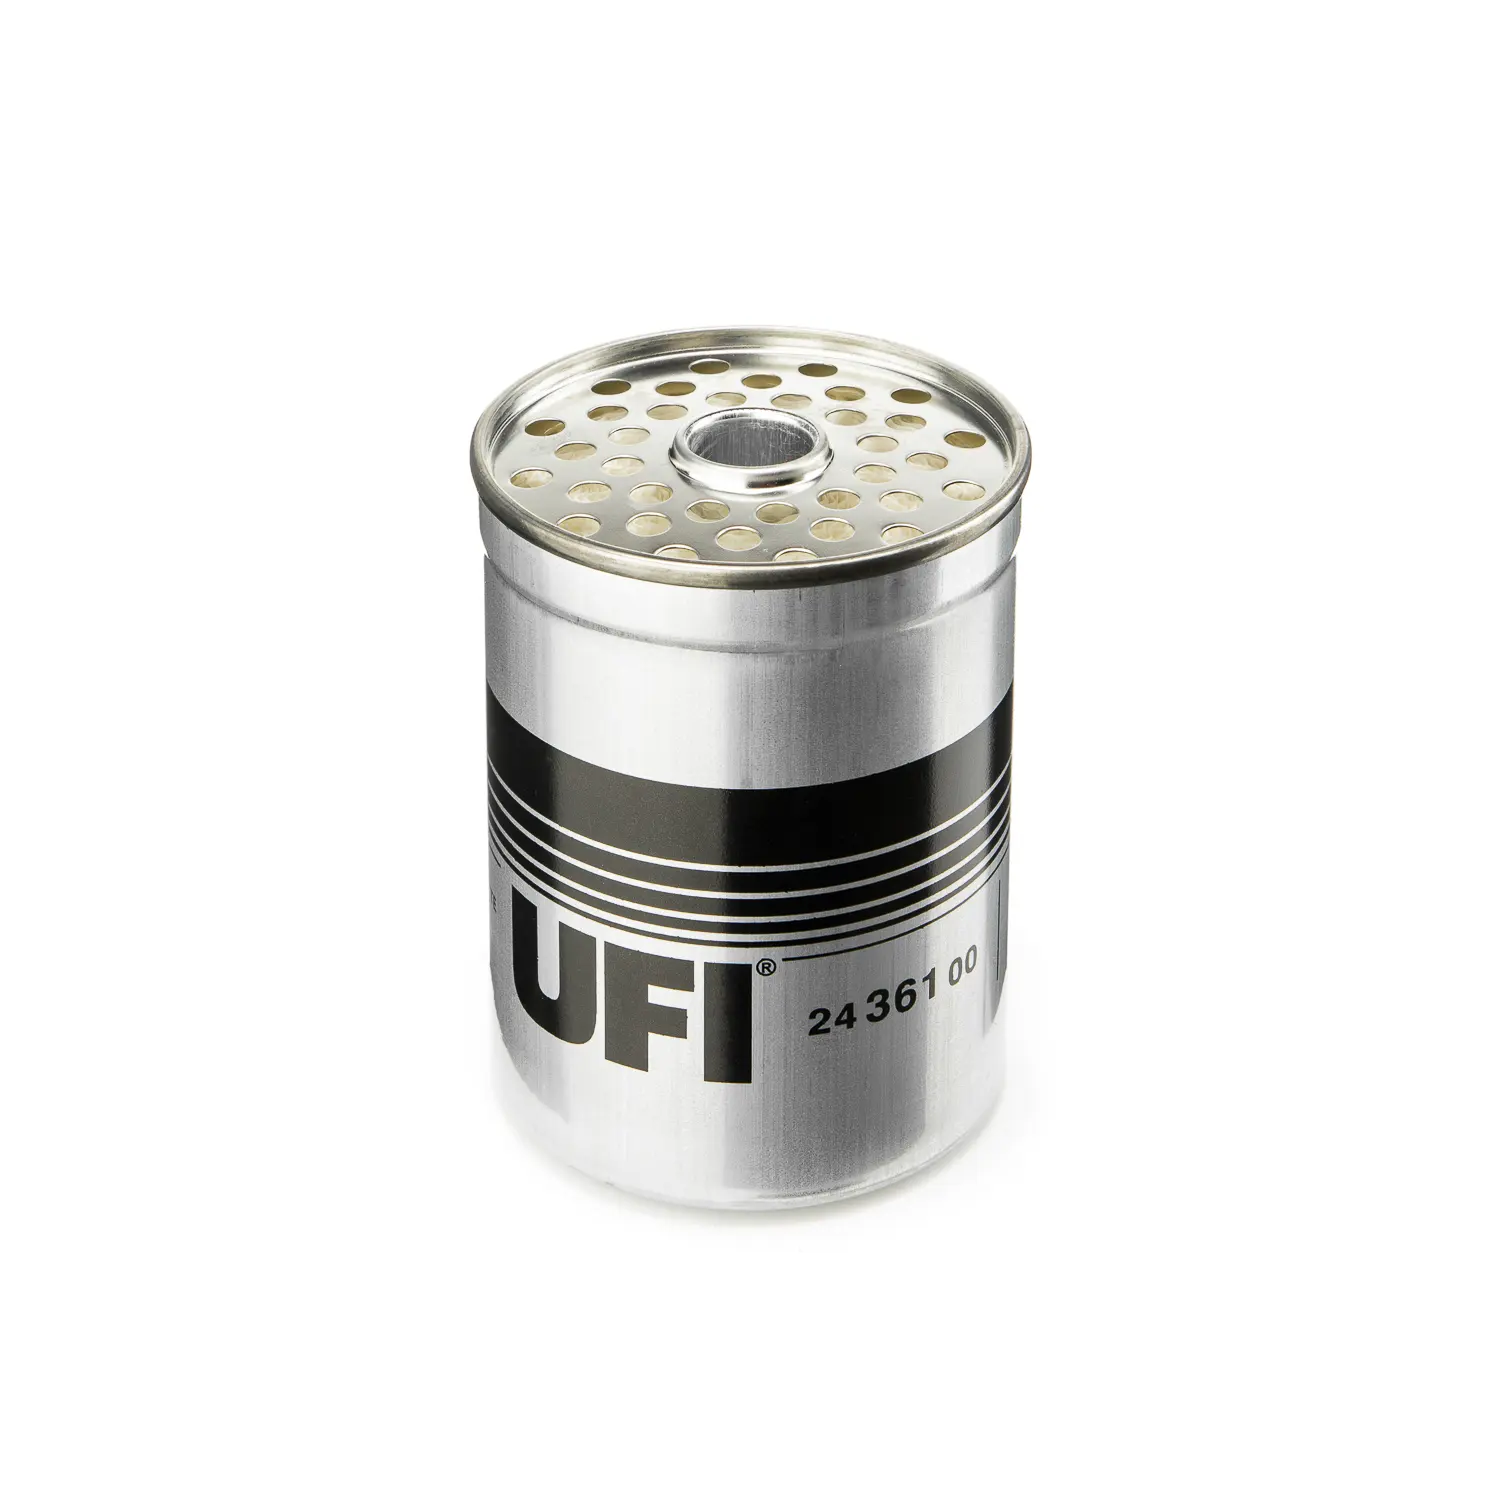 Direct Flow Fuel Filter for Engine Quality and Care - UFI Filters 24.361.00 - The Benchmark for Fuel Management